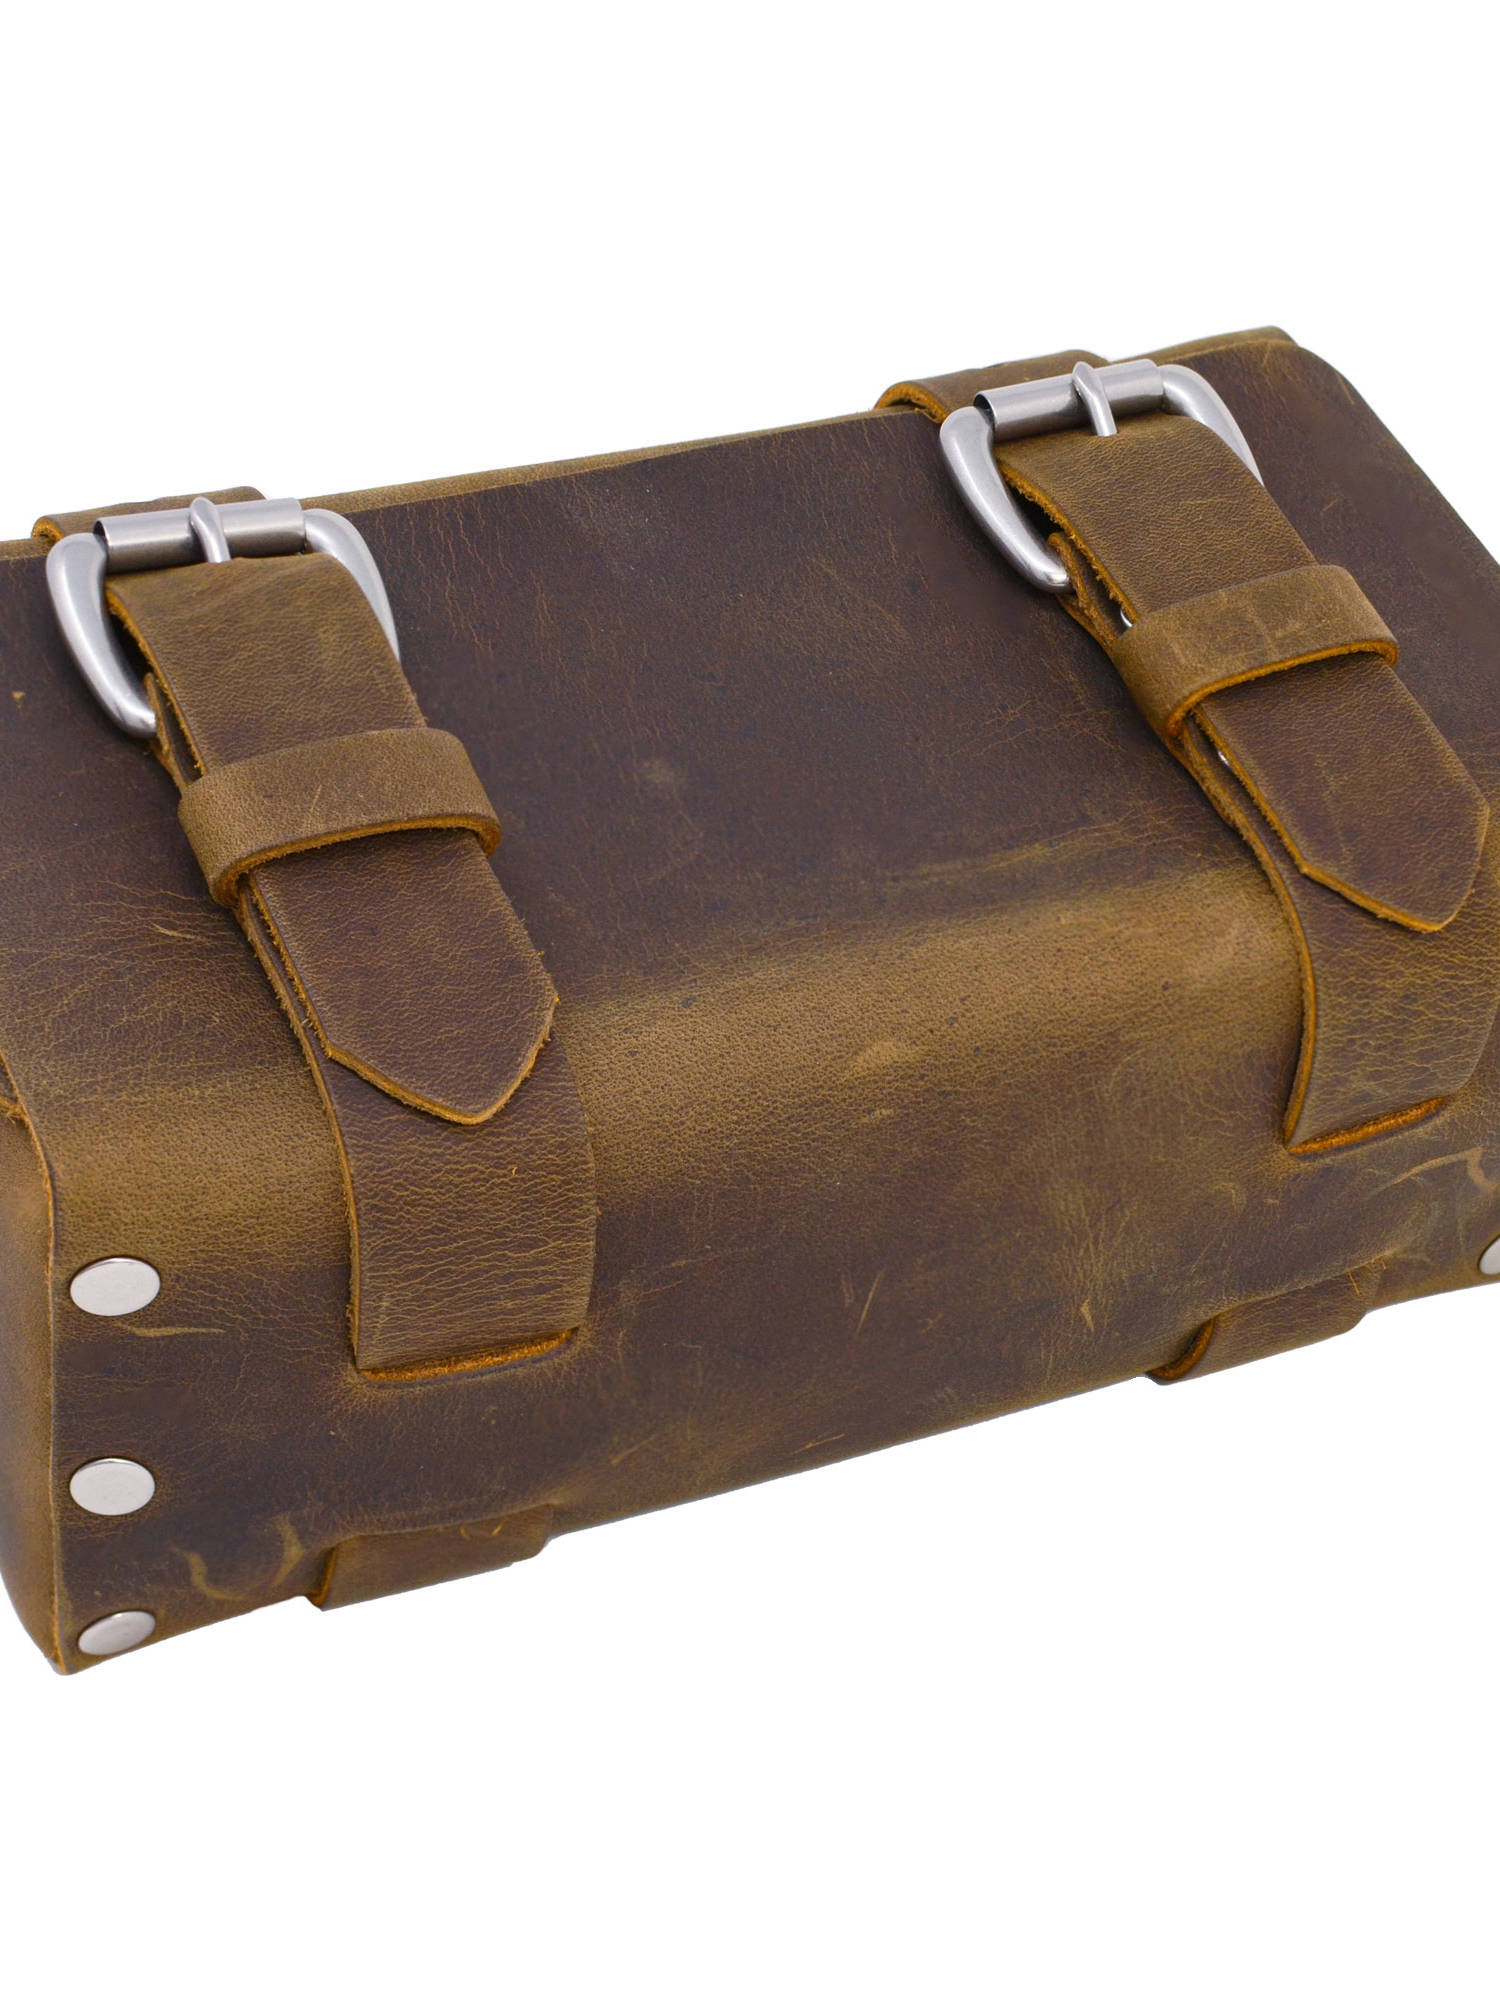 Standard Travel Case No 215 Crazy Horse Leather Brown Angled